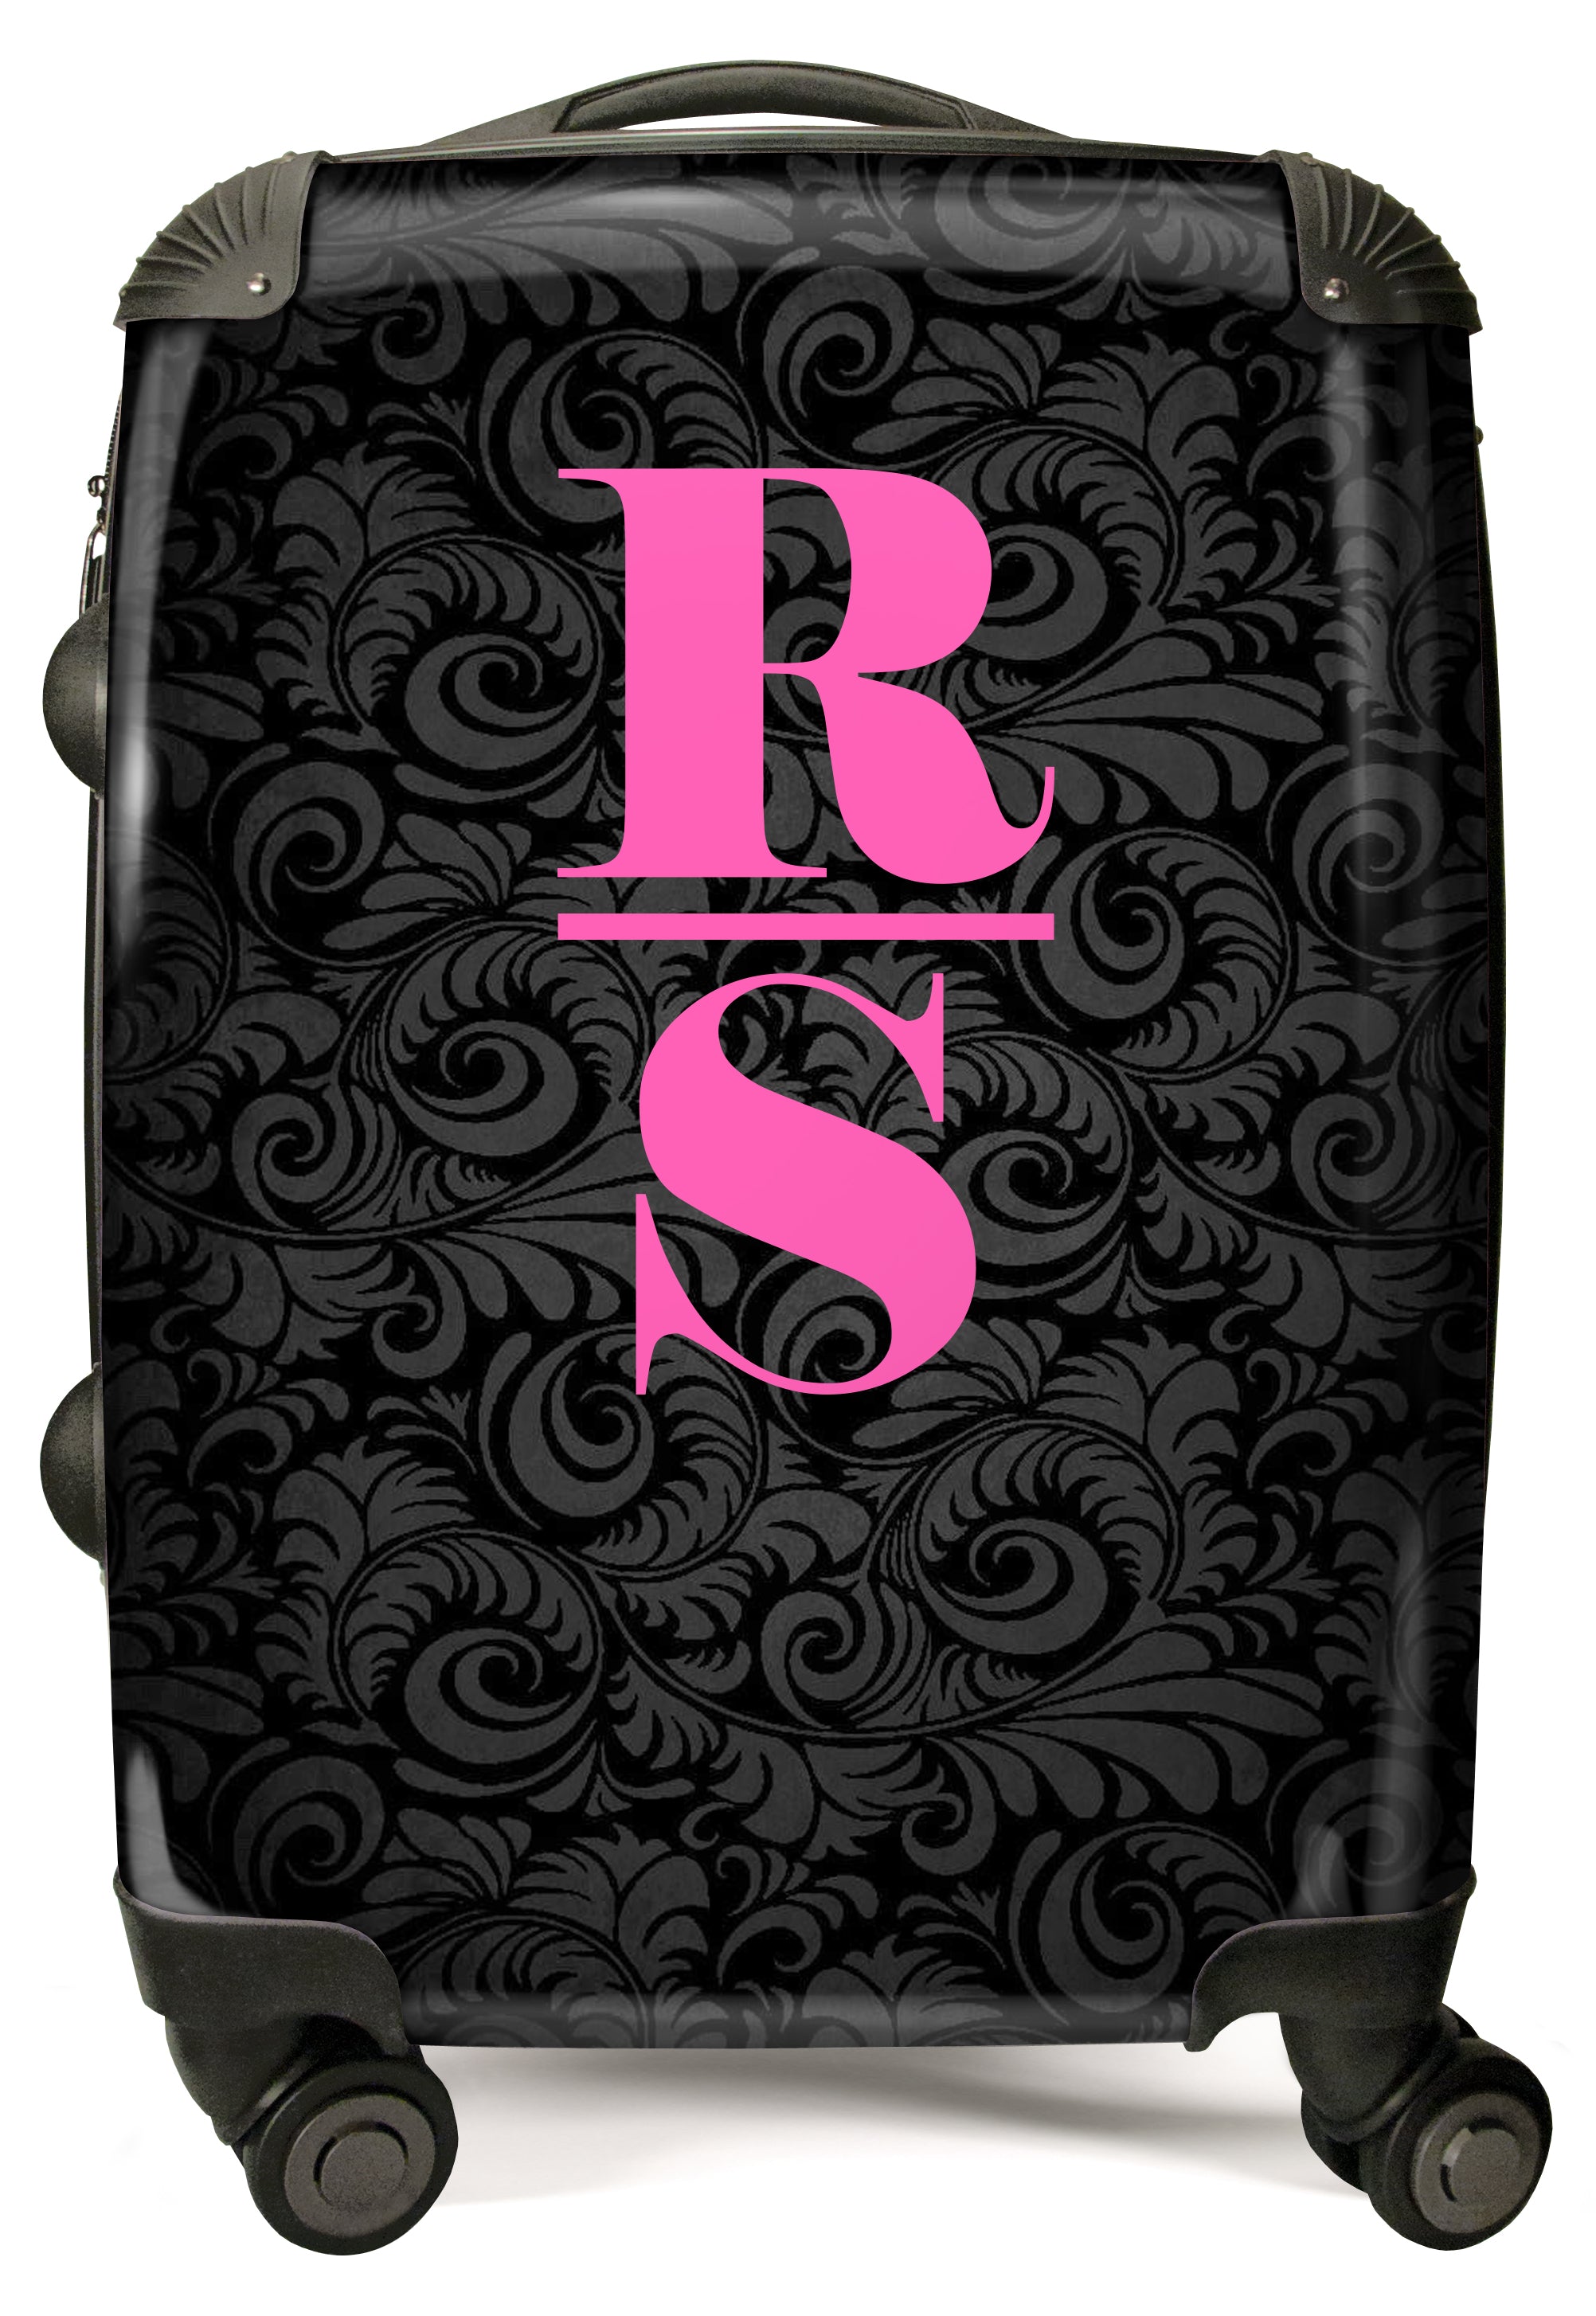 PERSONALIZED BLACK FEATHER PRINT INITIAL LUGGAGE